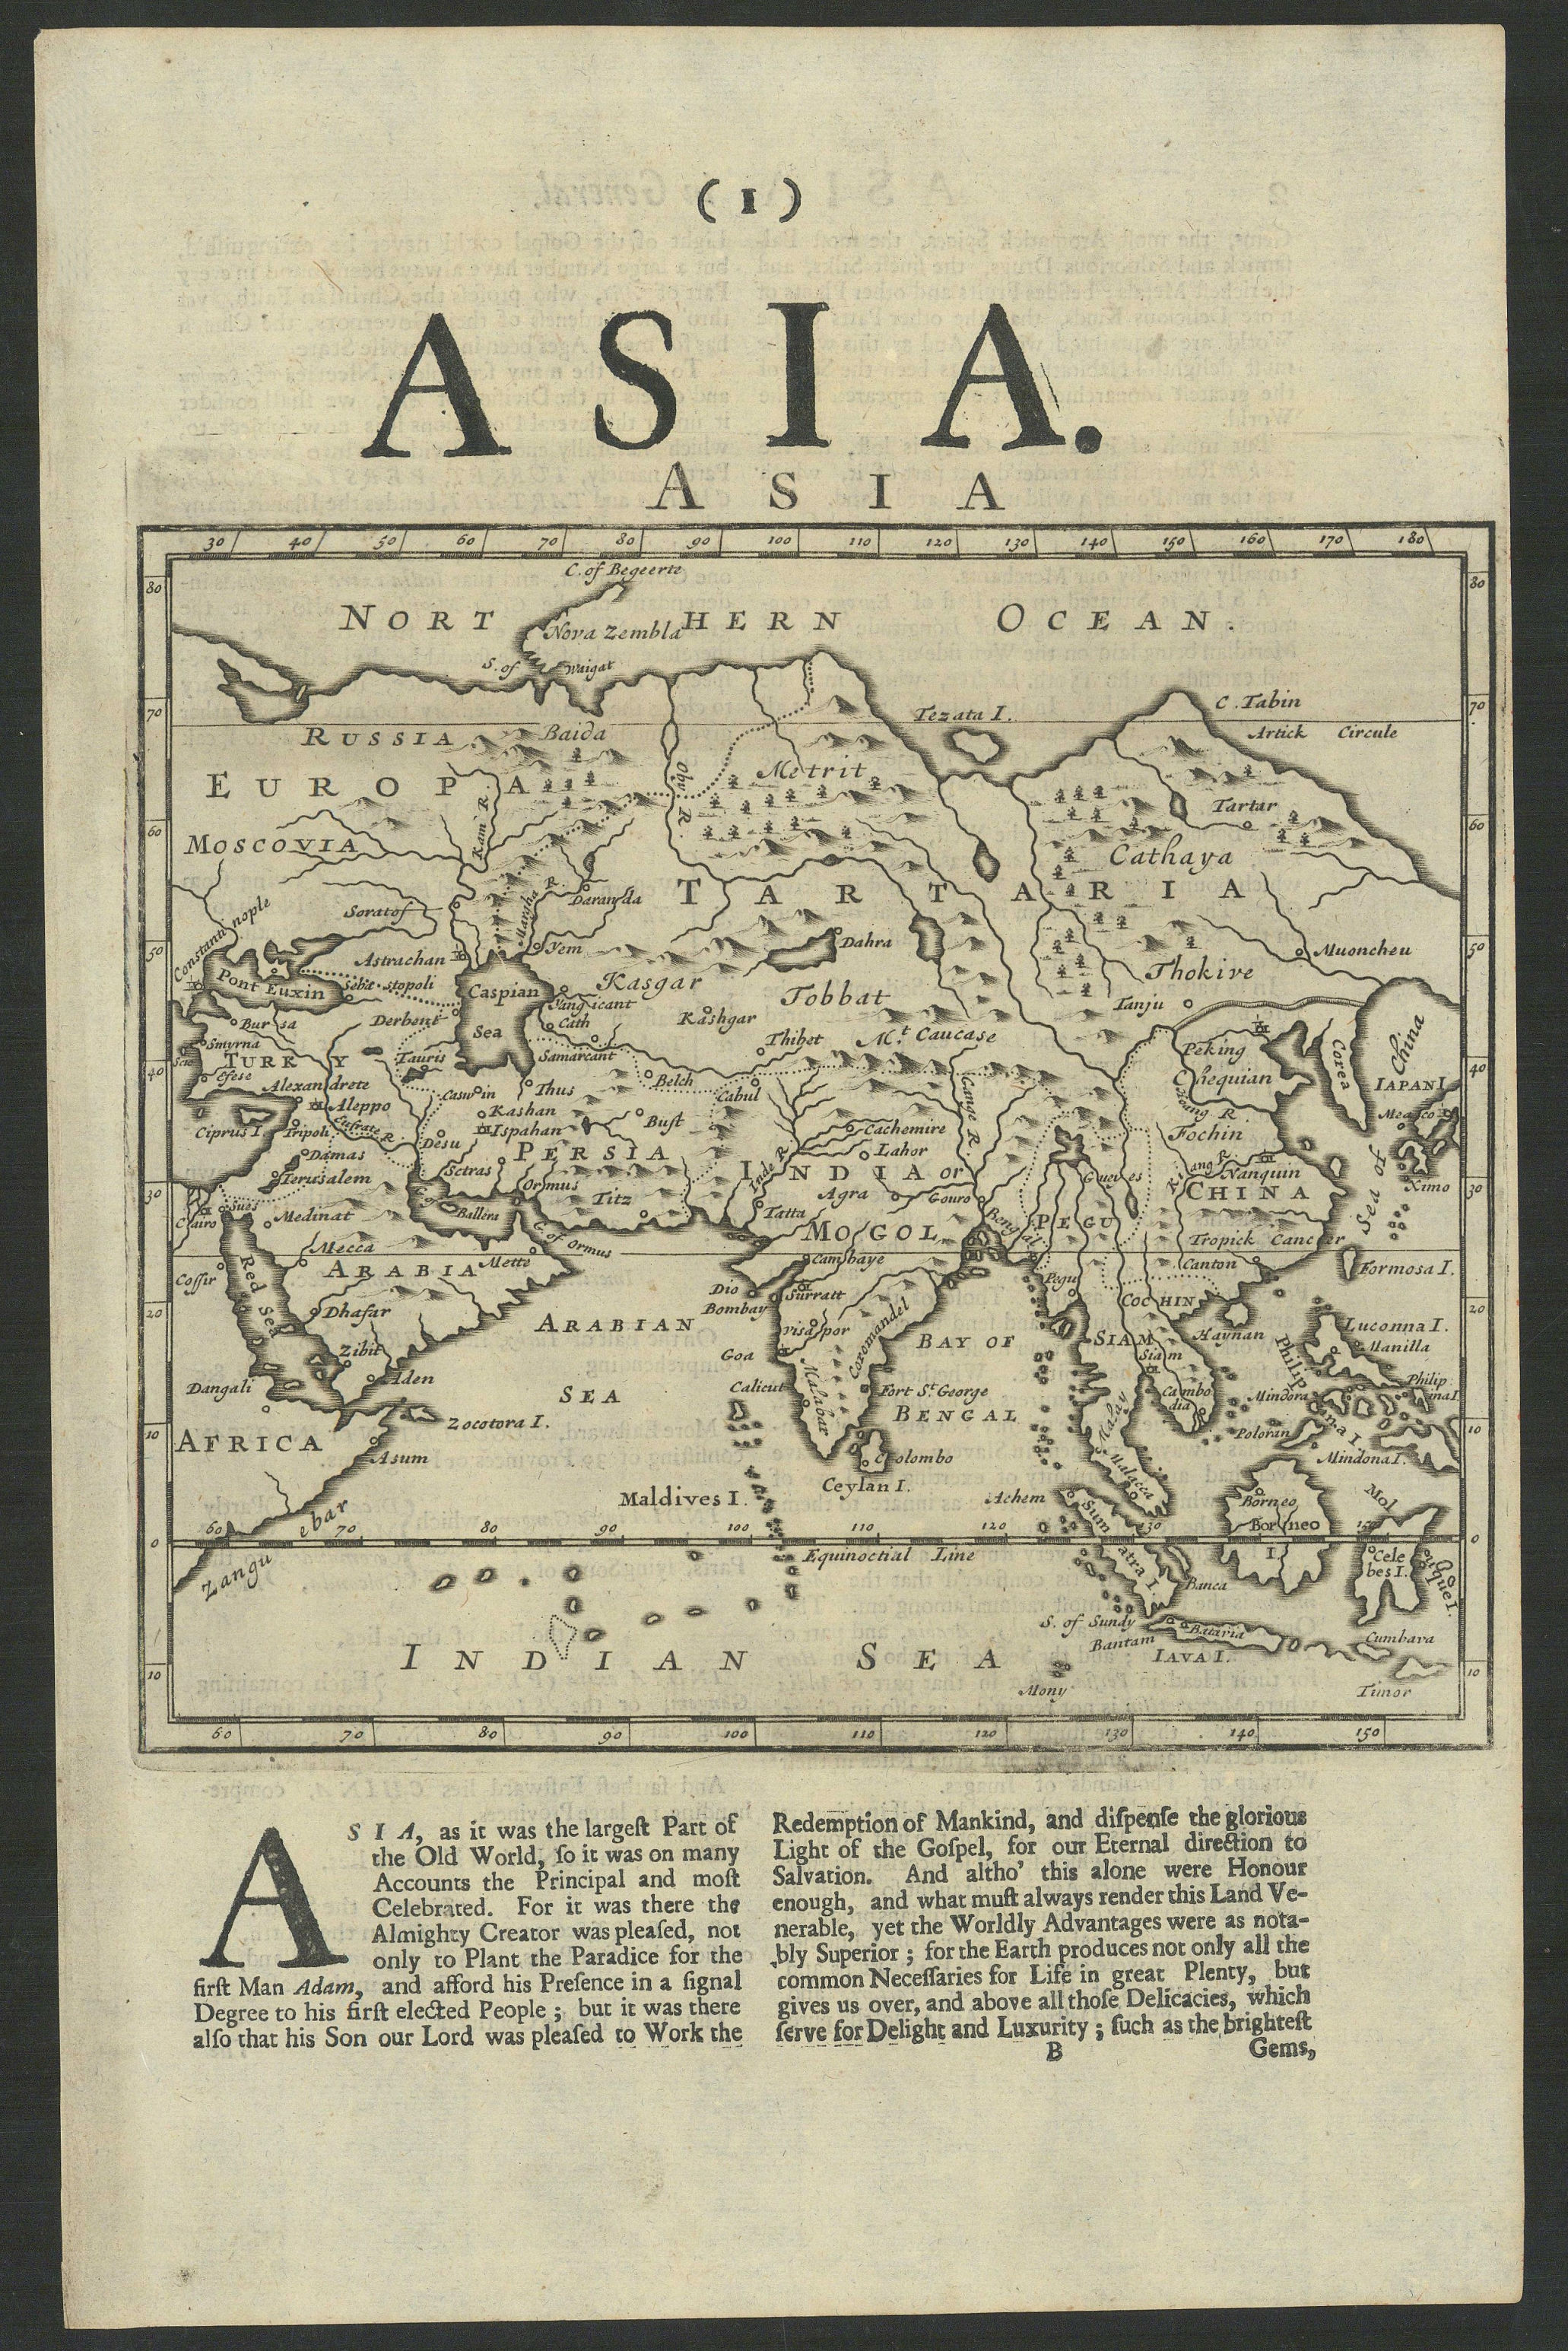 Associate Product Asia by Herman Moll. Great Wall of China. Mogol empire. Tartaria 1709 old map